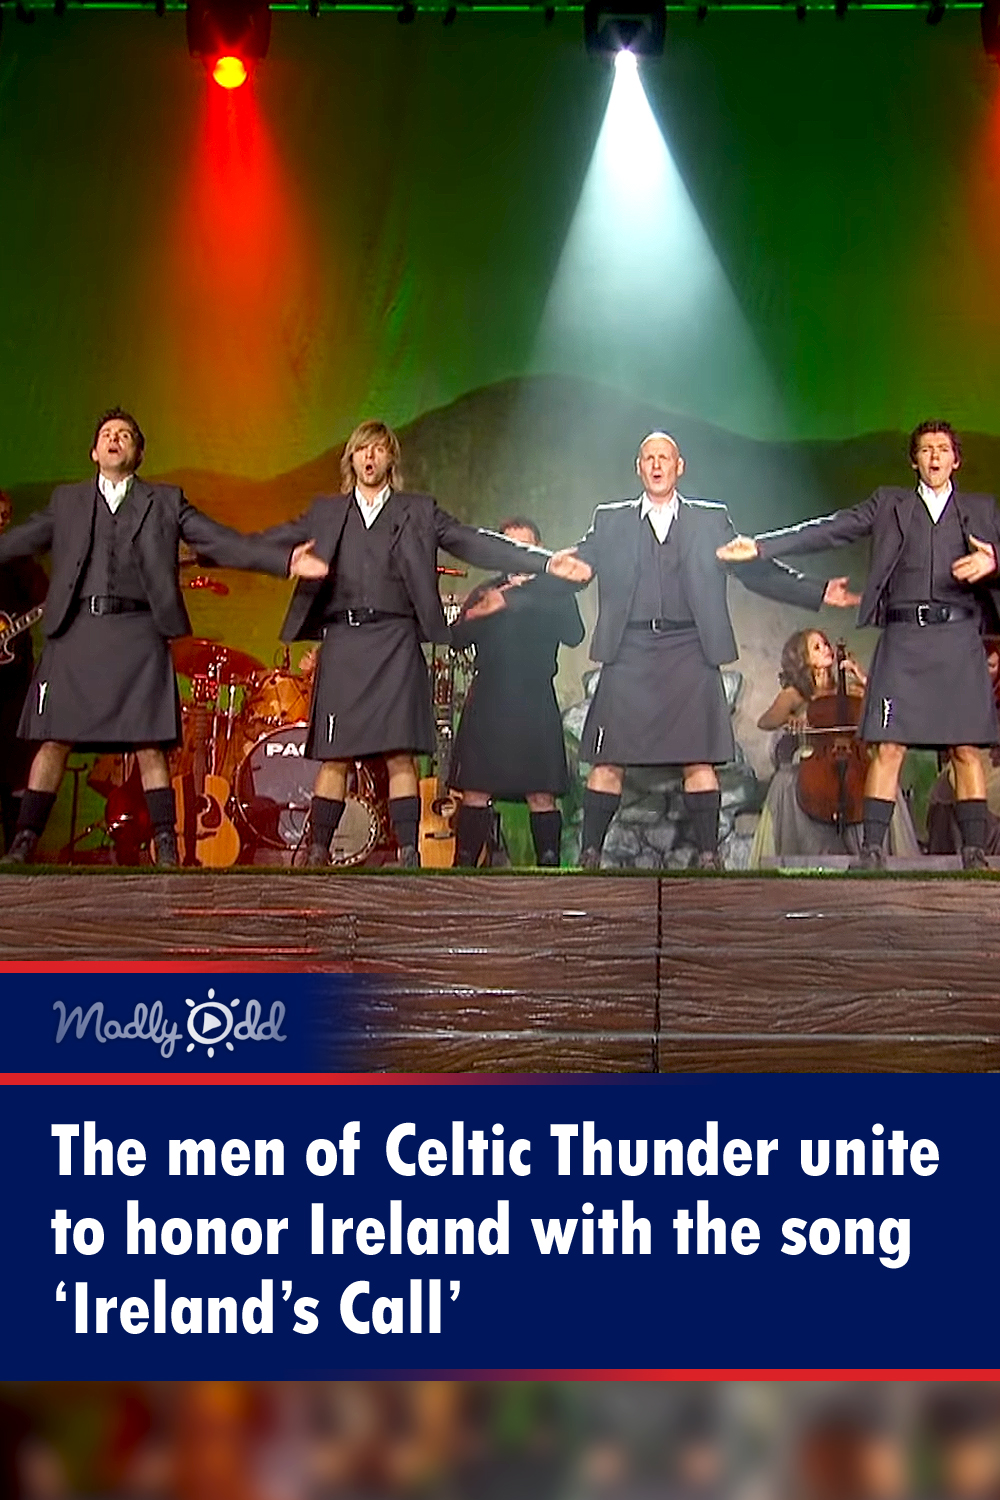 The men of Celtic Thunder unite to honor Ireland with the song ‘Ireland’s Call’